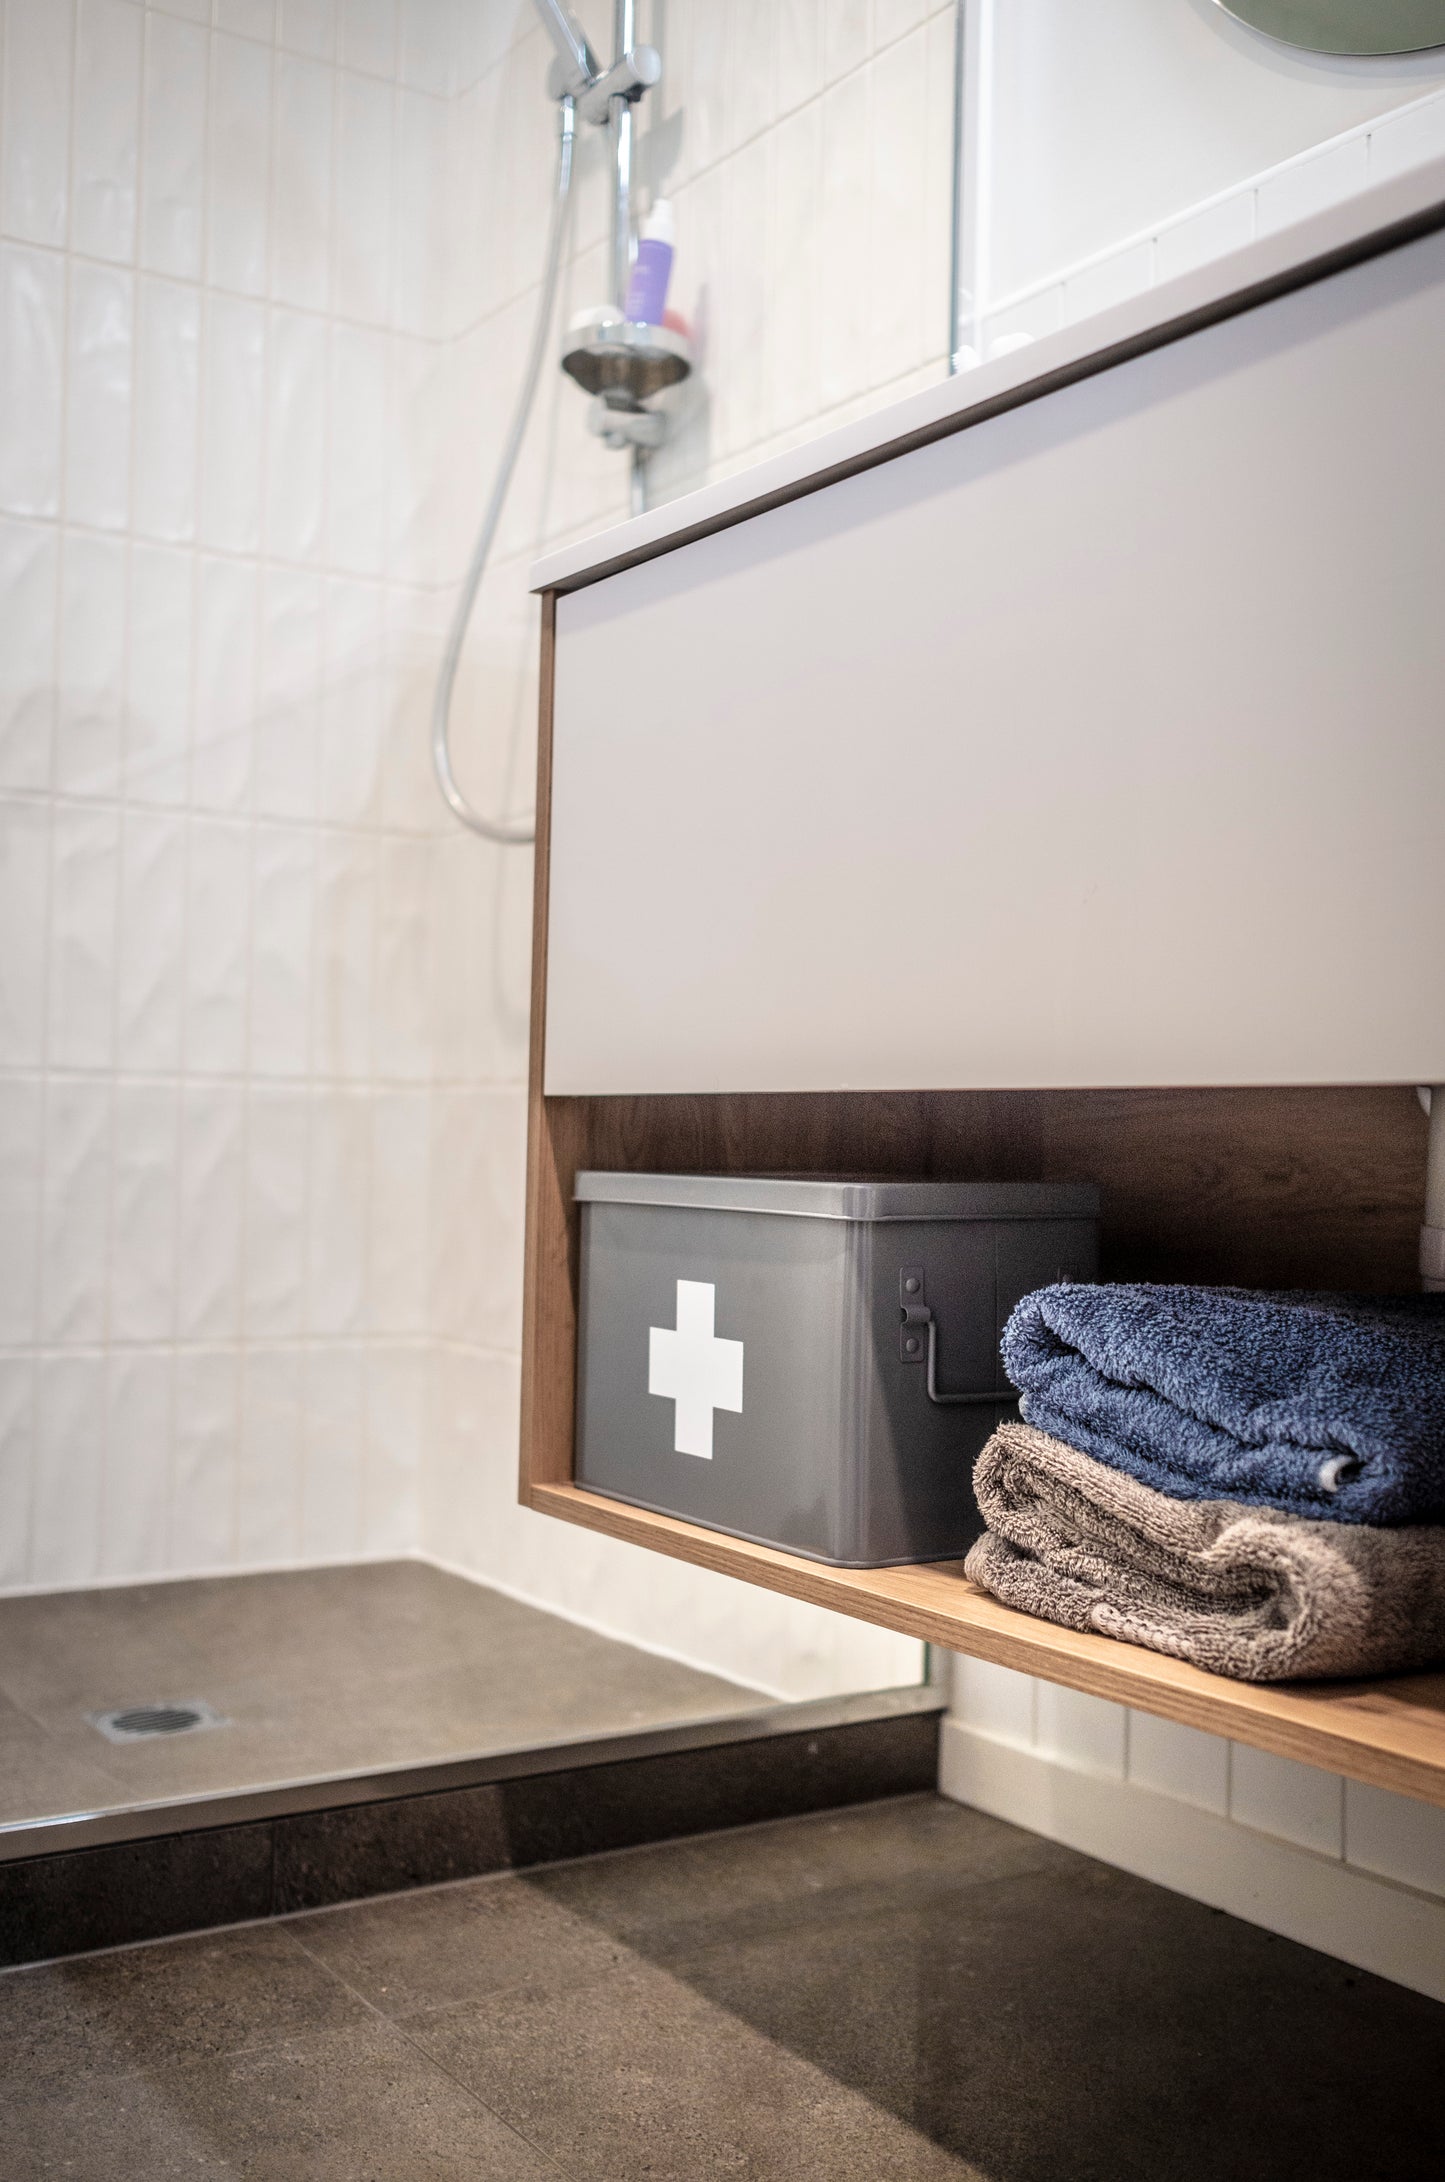 Family essential kit for your home first aid needs. Sustainable storage